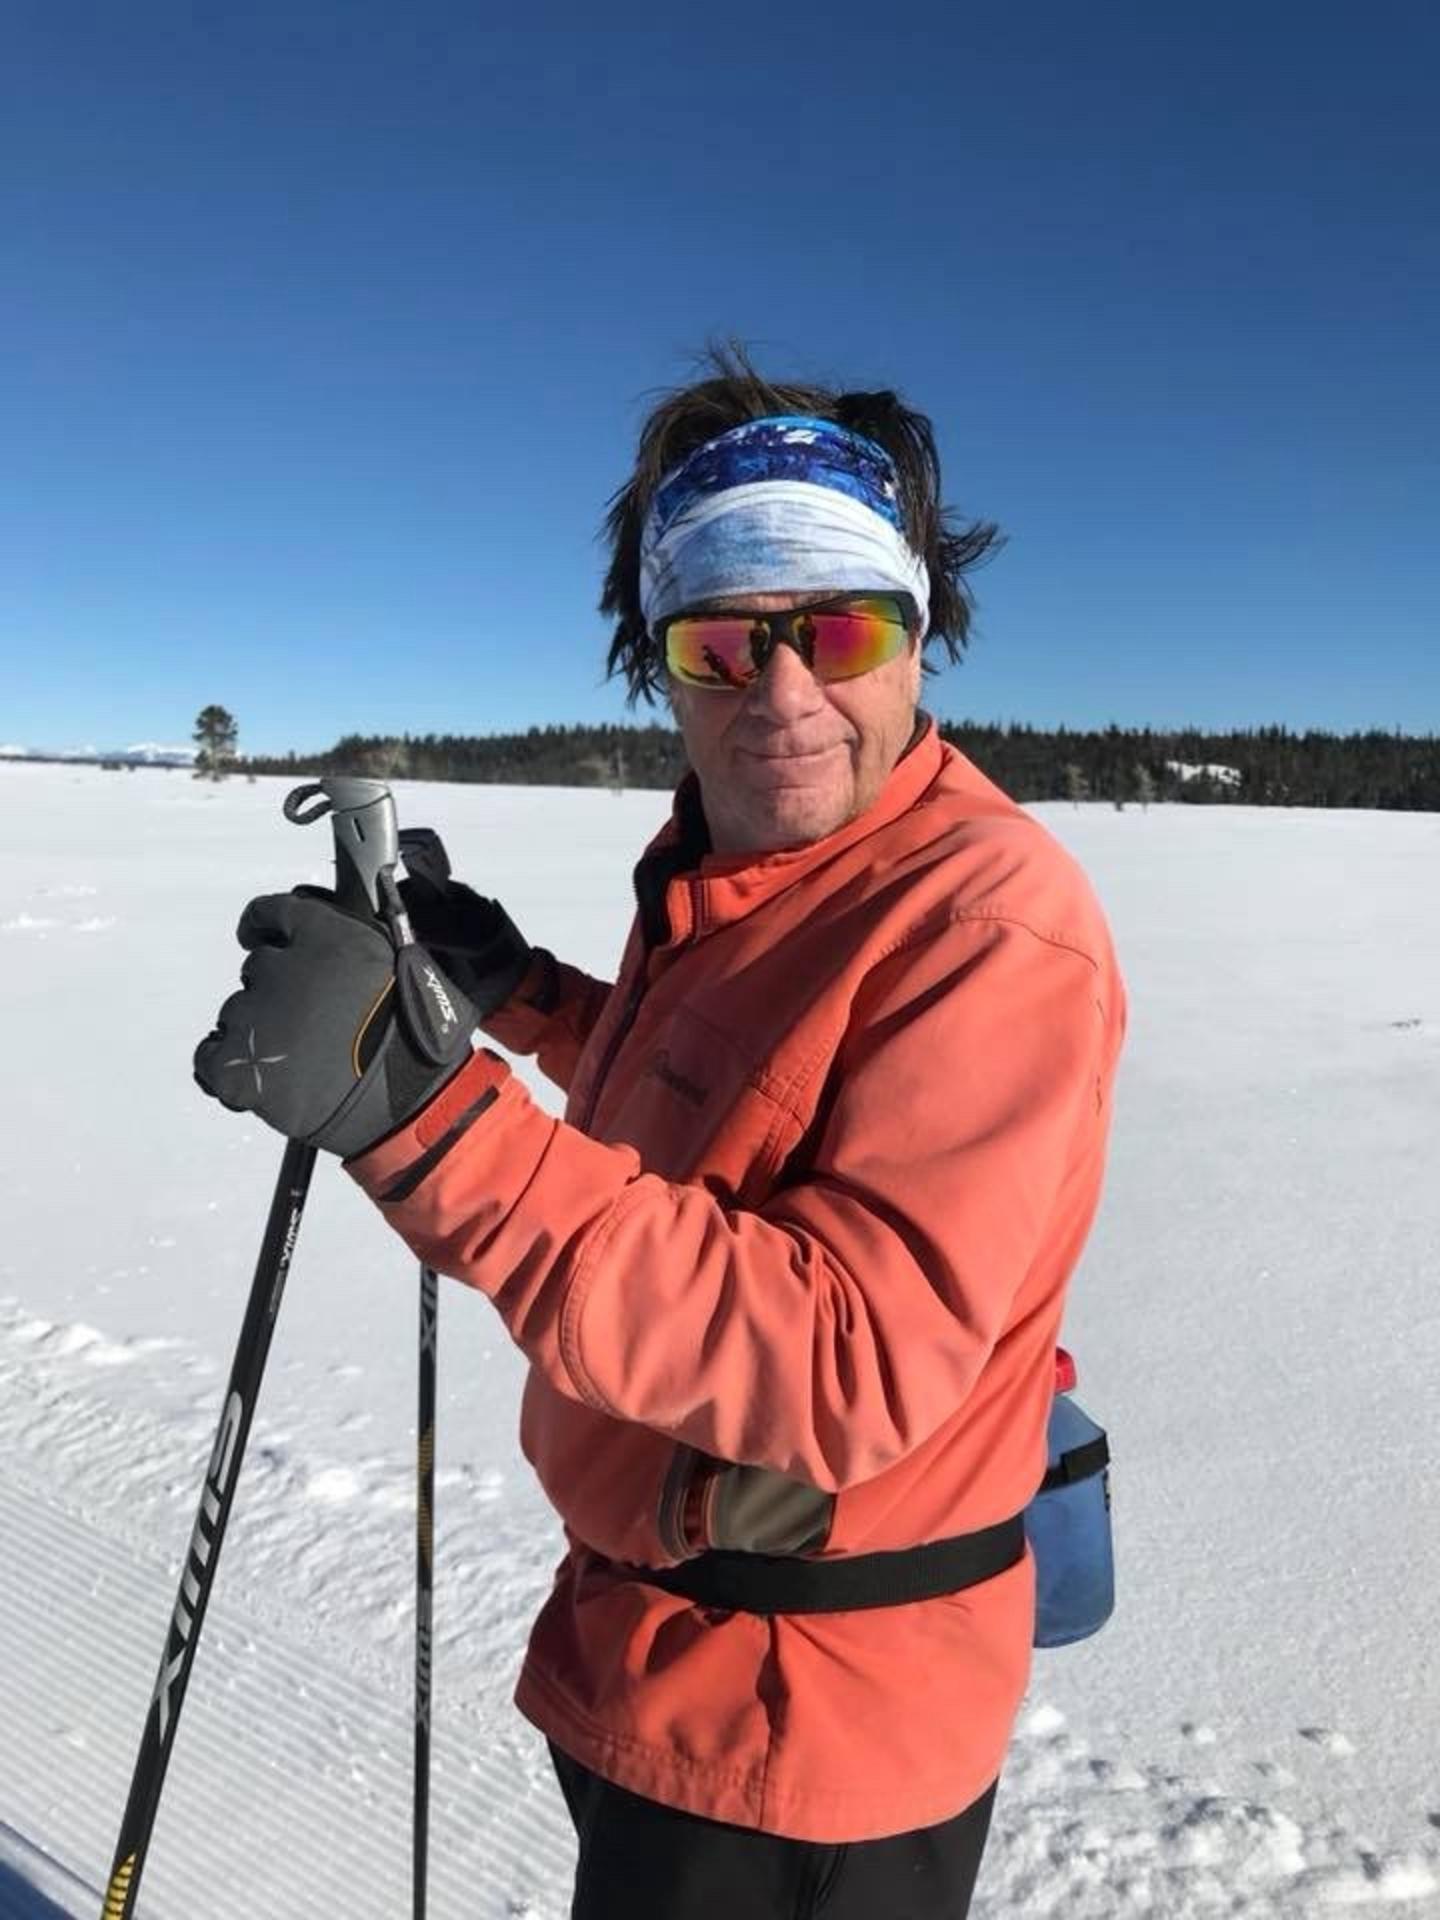 Our last glimpse of David Swift. Kathryn Turner took this photo of him as they rendezvoused while cross country skiing in Grand Teton National Park. Photo courtesy Kathryn Turner